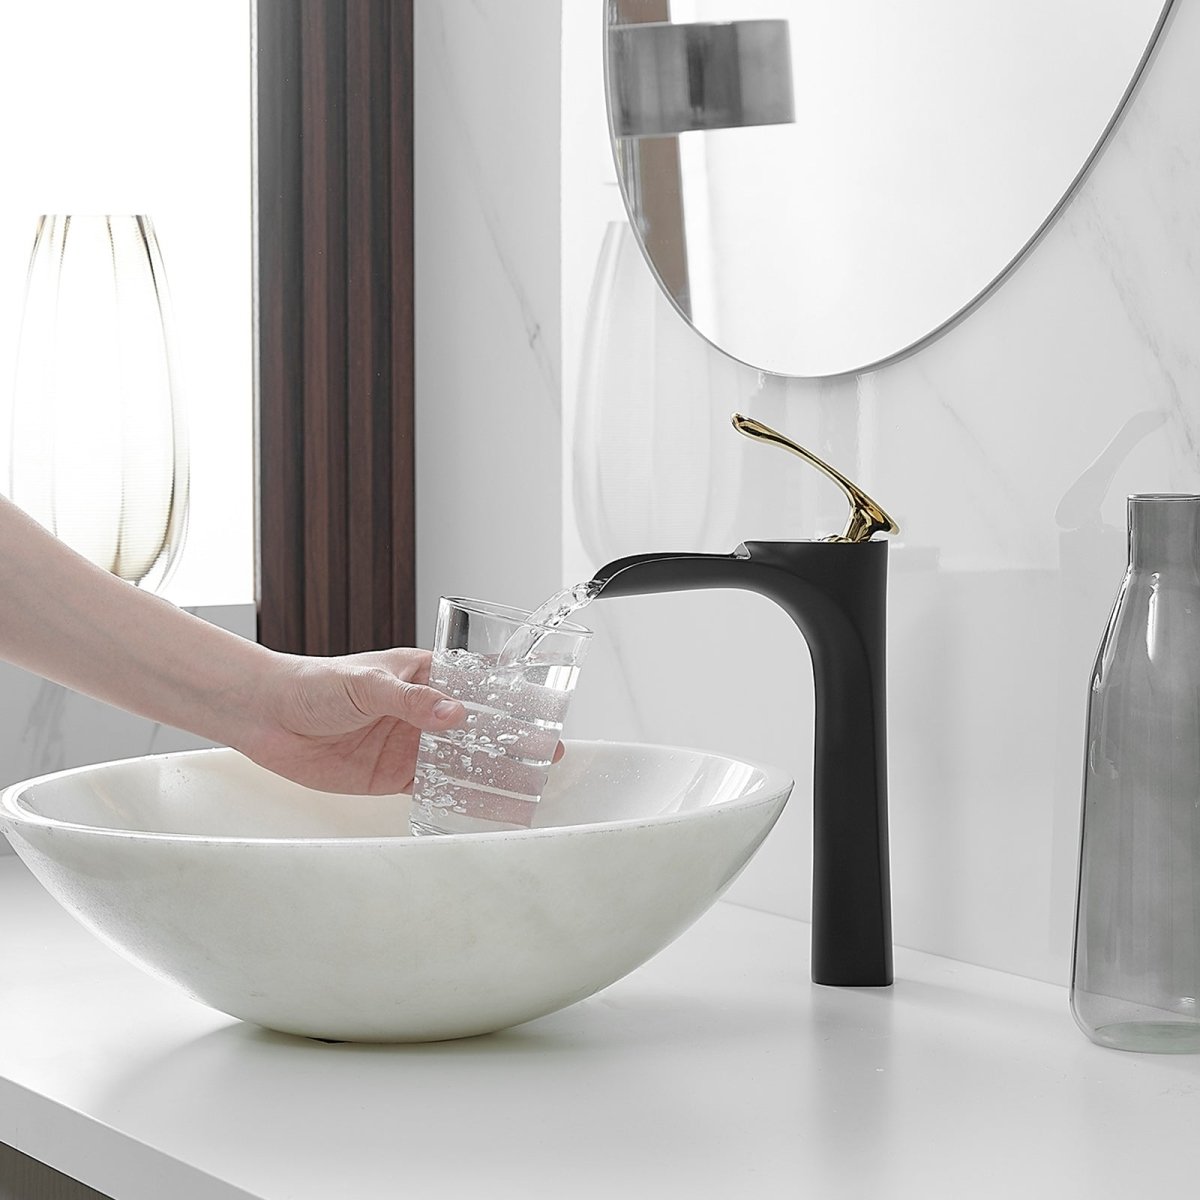 Waterfall Bathroom Vessel Sink Faucet With Drain Black Gold - buyfaucet.com